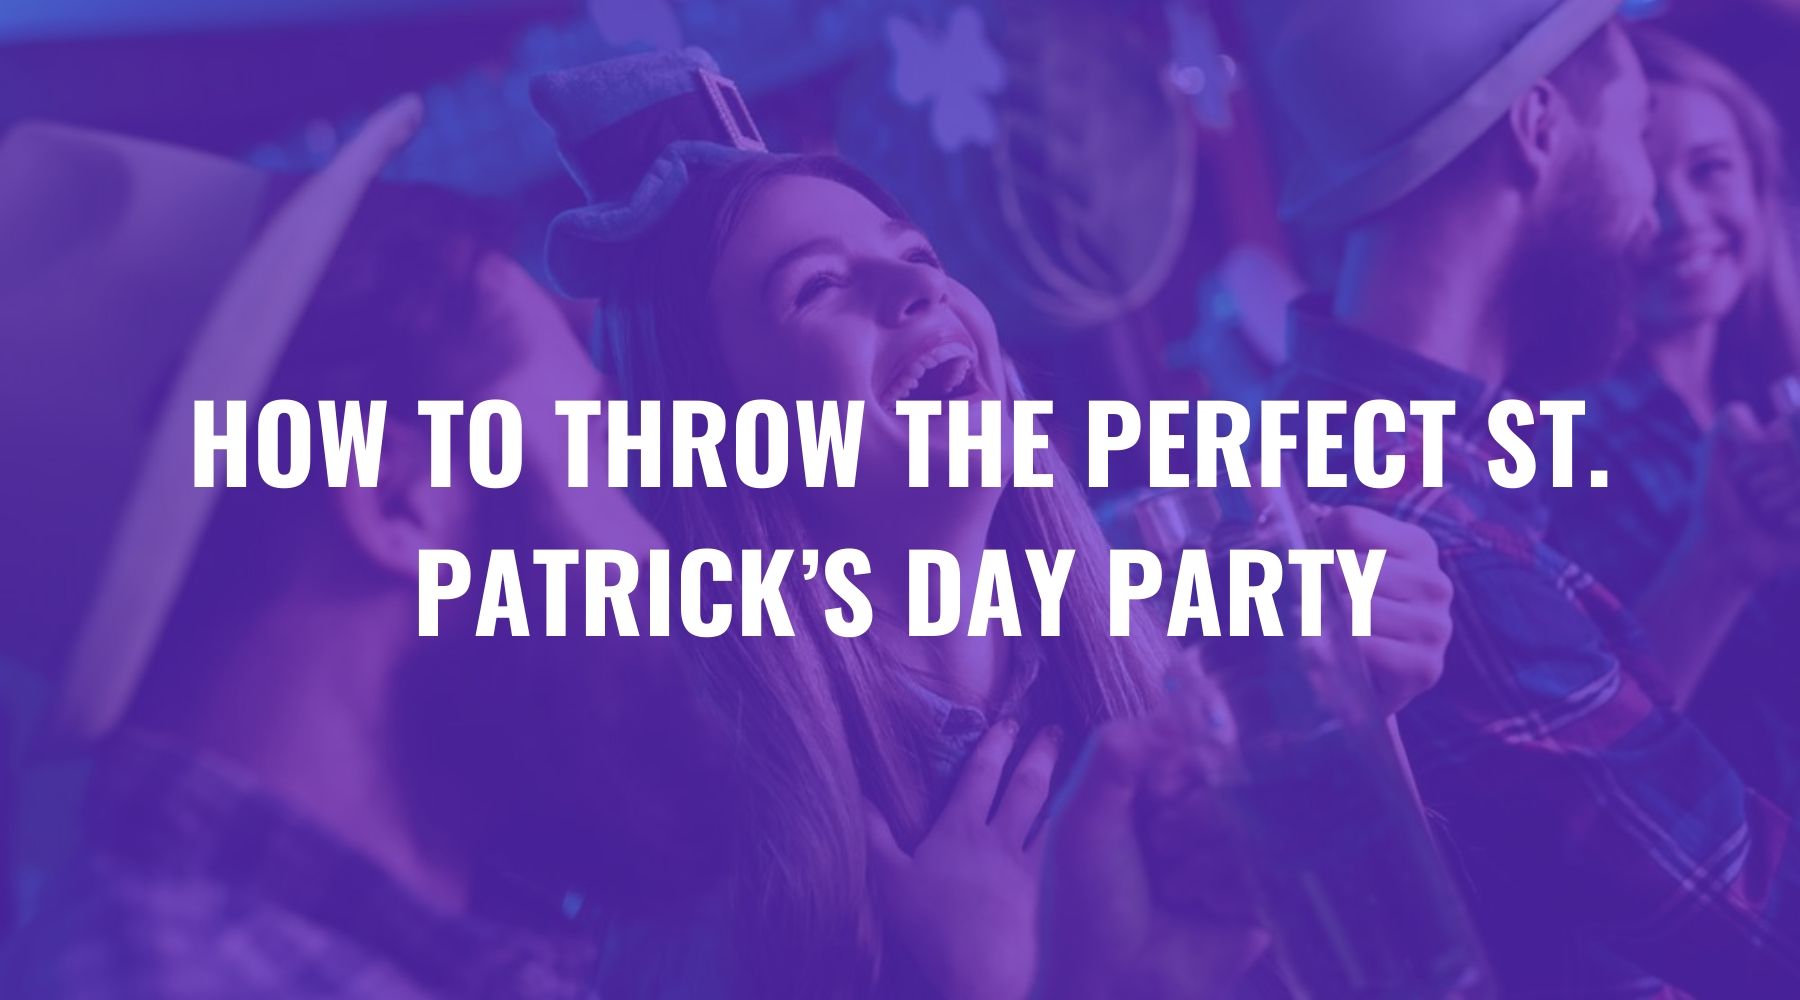 How to Throw the Perfect St. Patrick’s Day Party